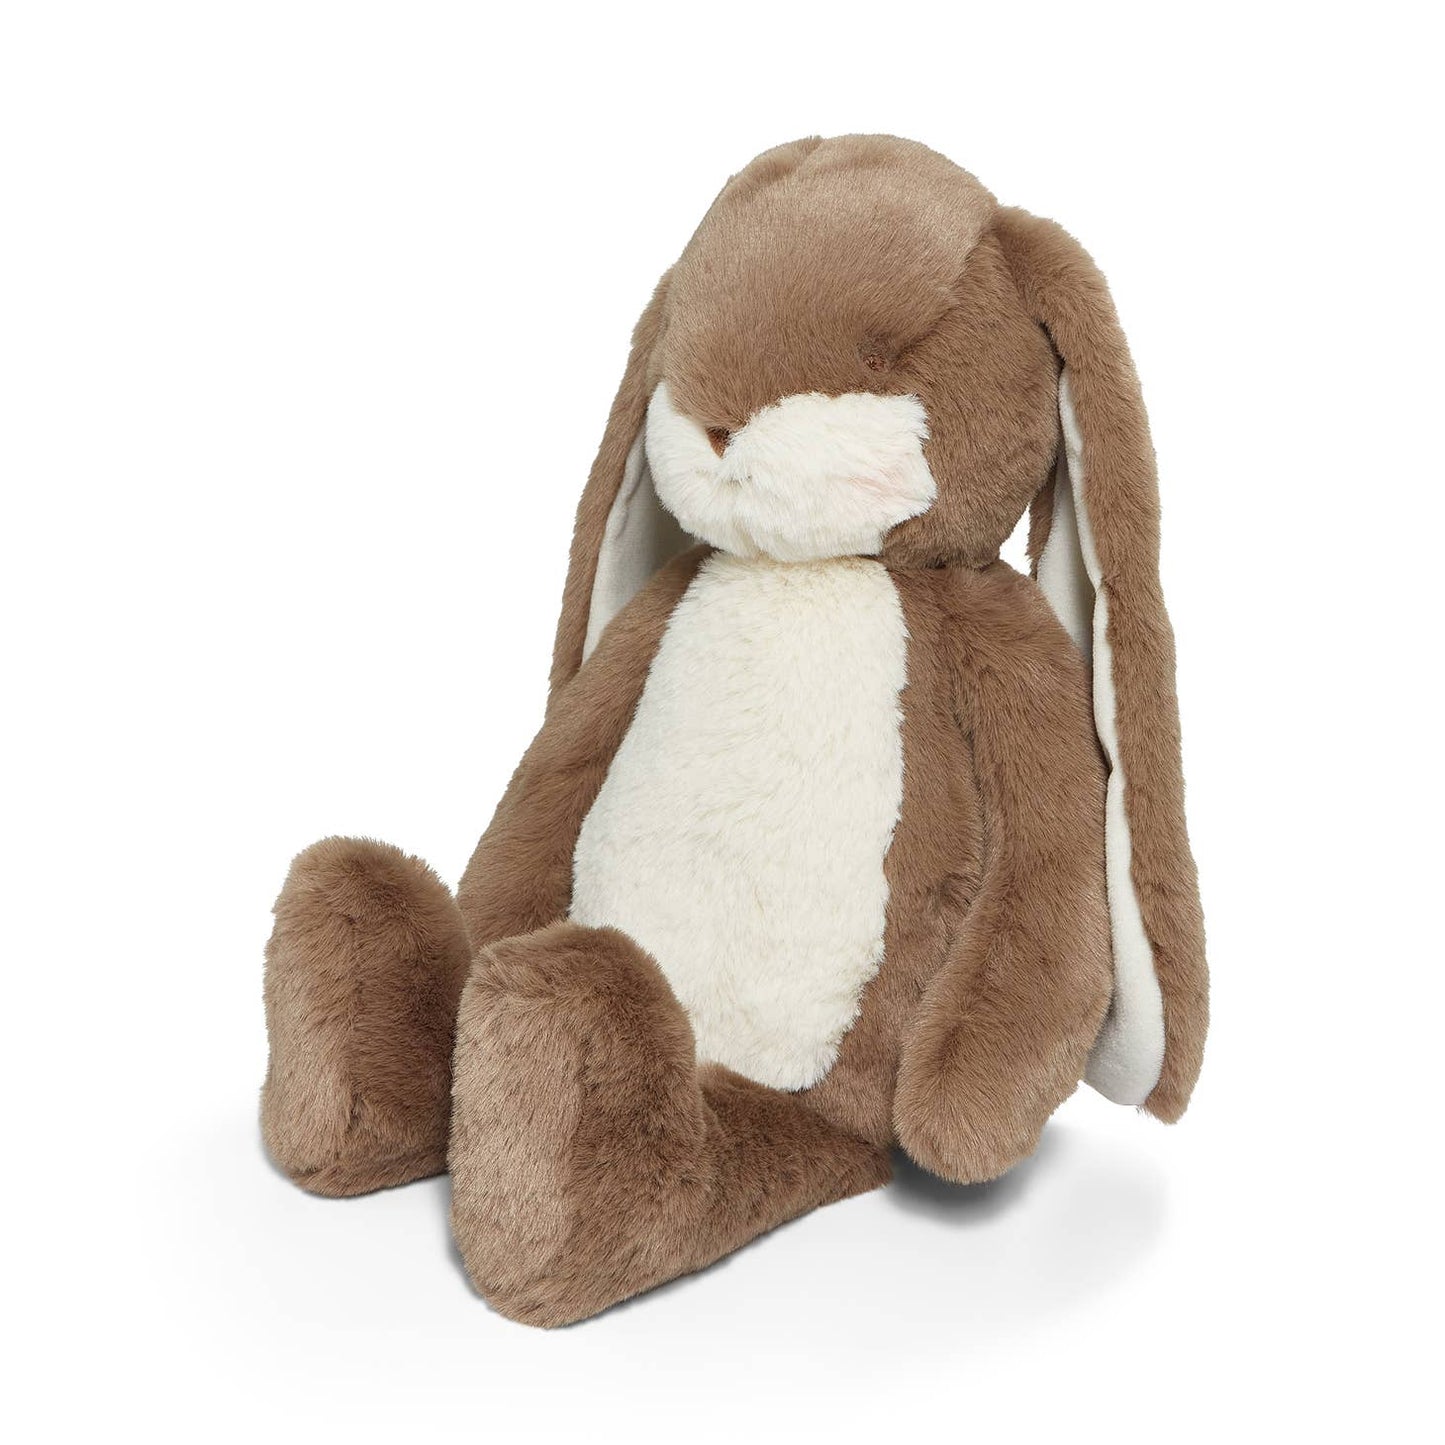 Floppy Nibble Bunny 16'' - Ginger Snap